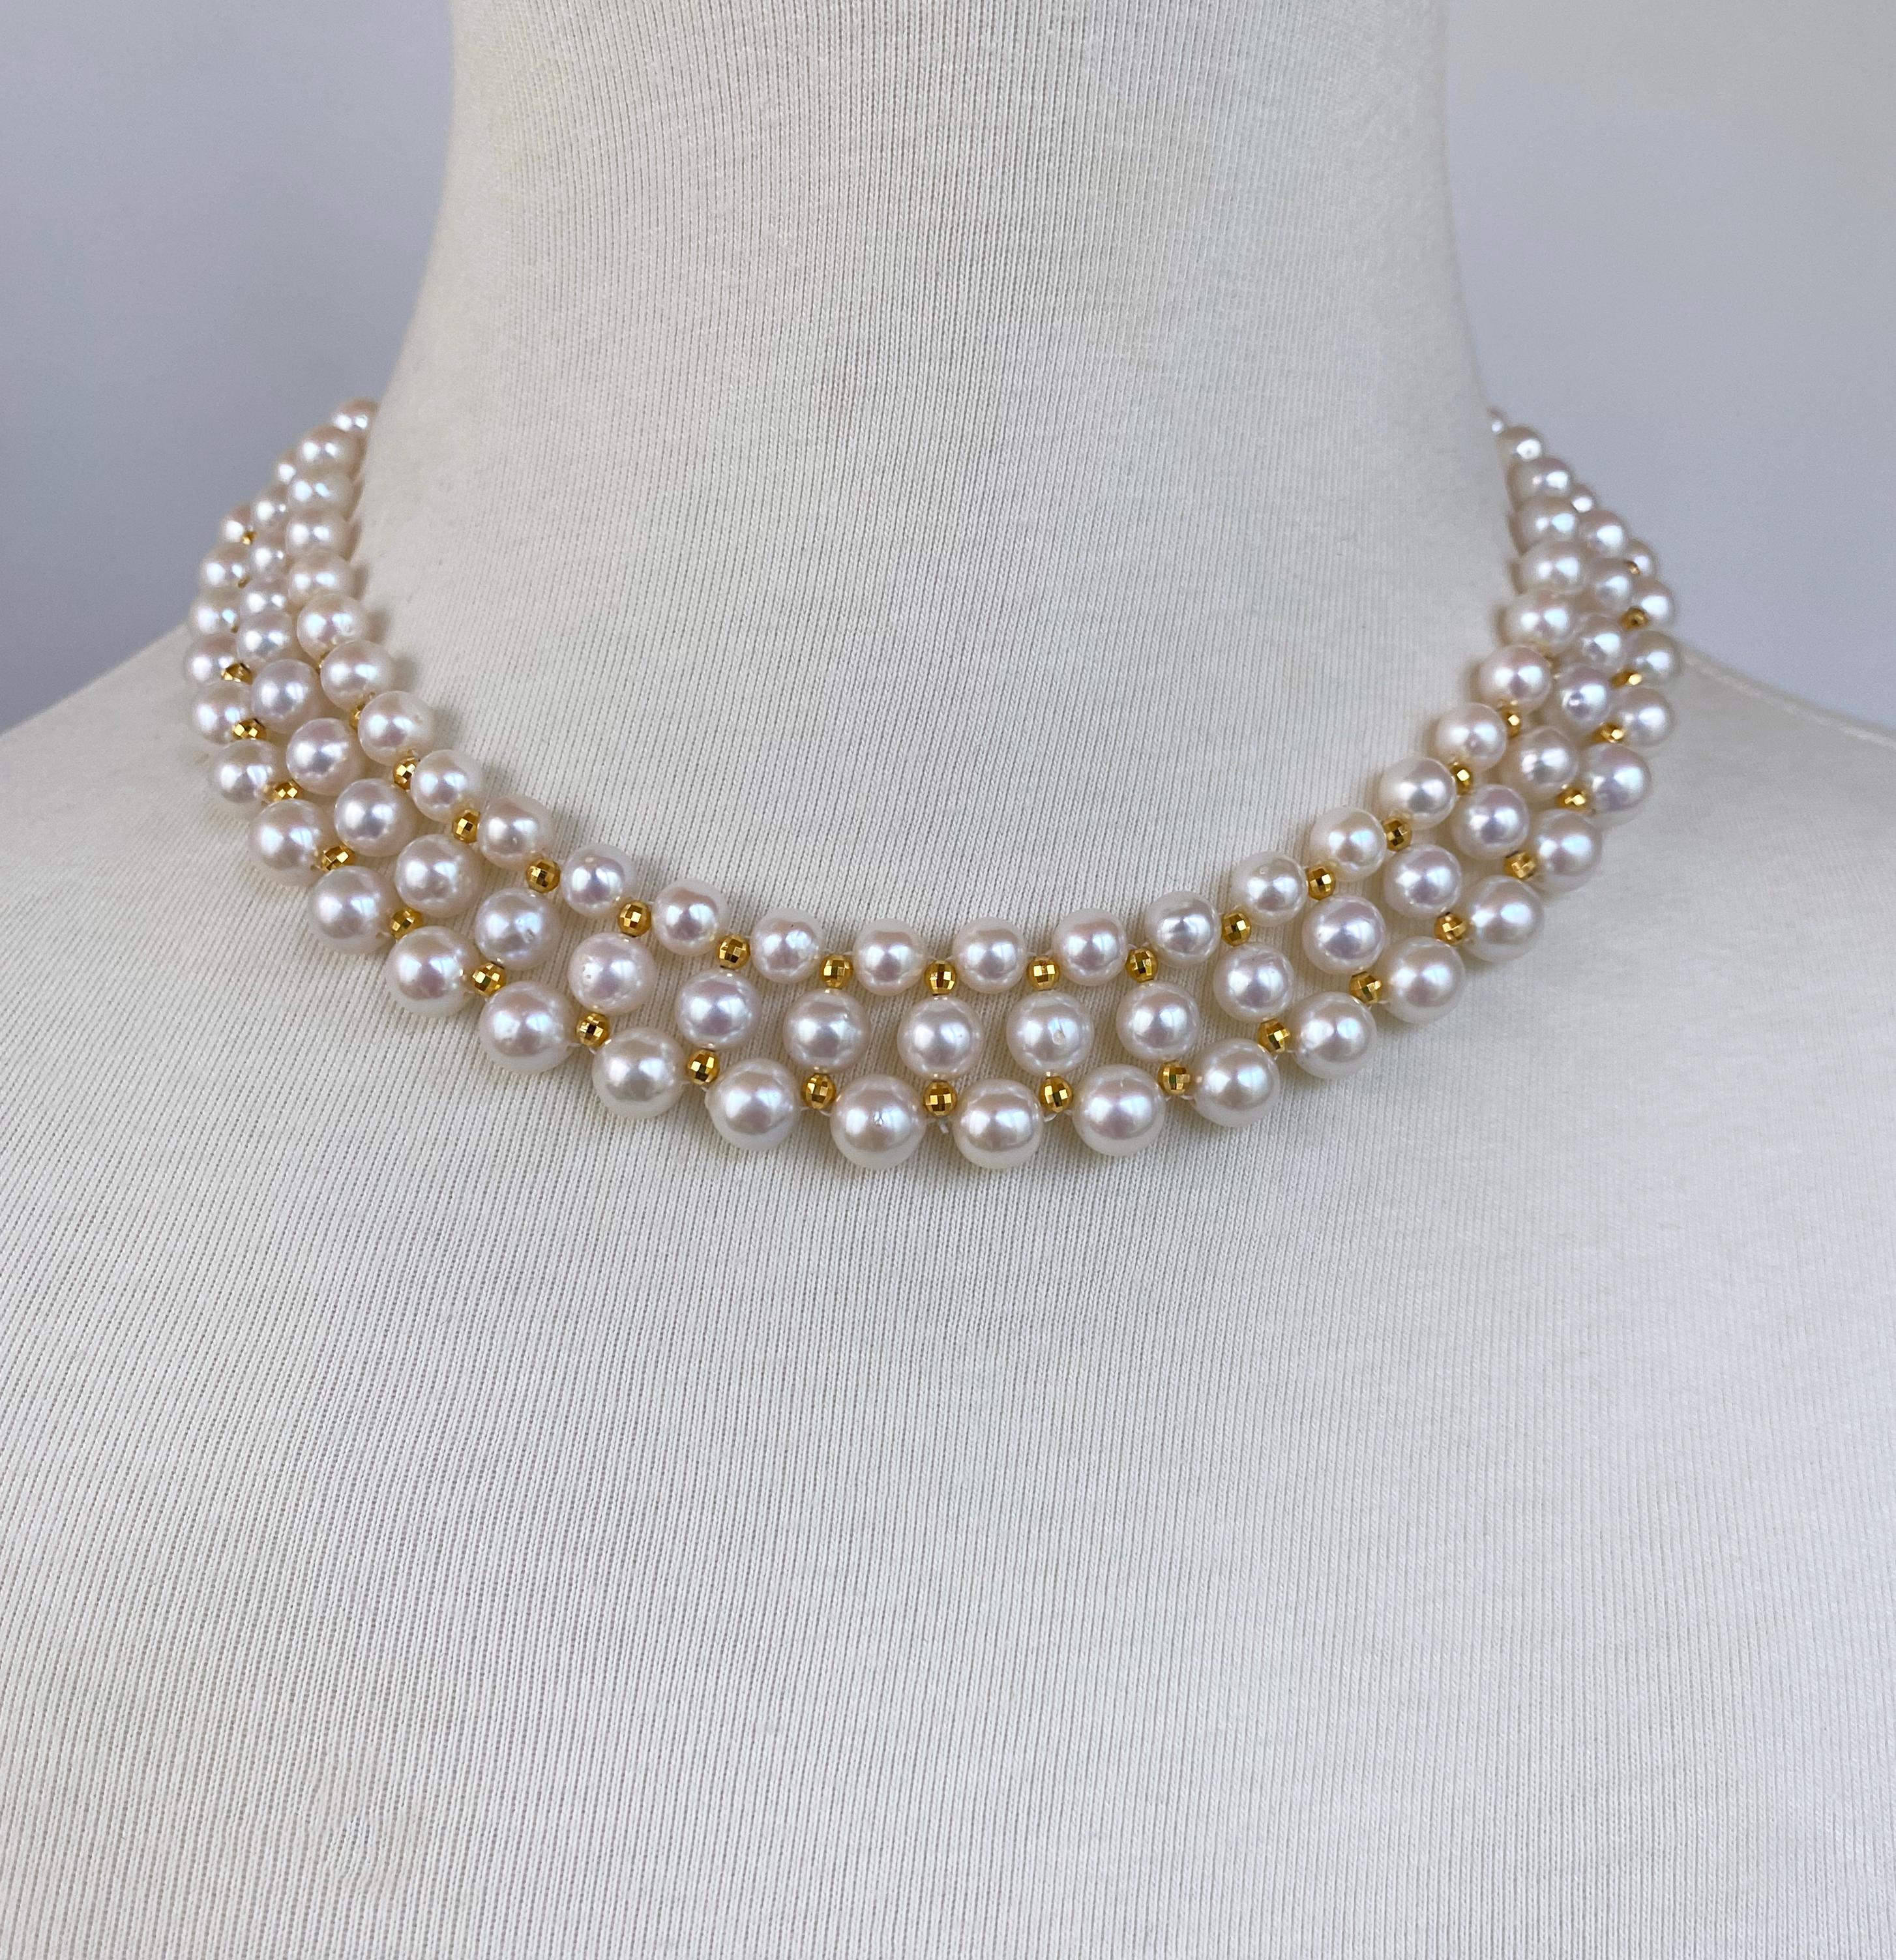 Artisan Marina J. Pearl Woven Necklace with 14k Yellow Gold Faceted Findings & Clasp For Sale